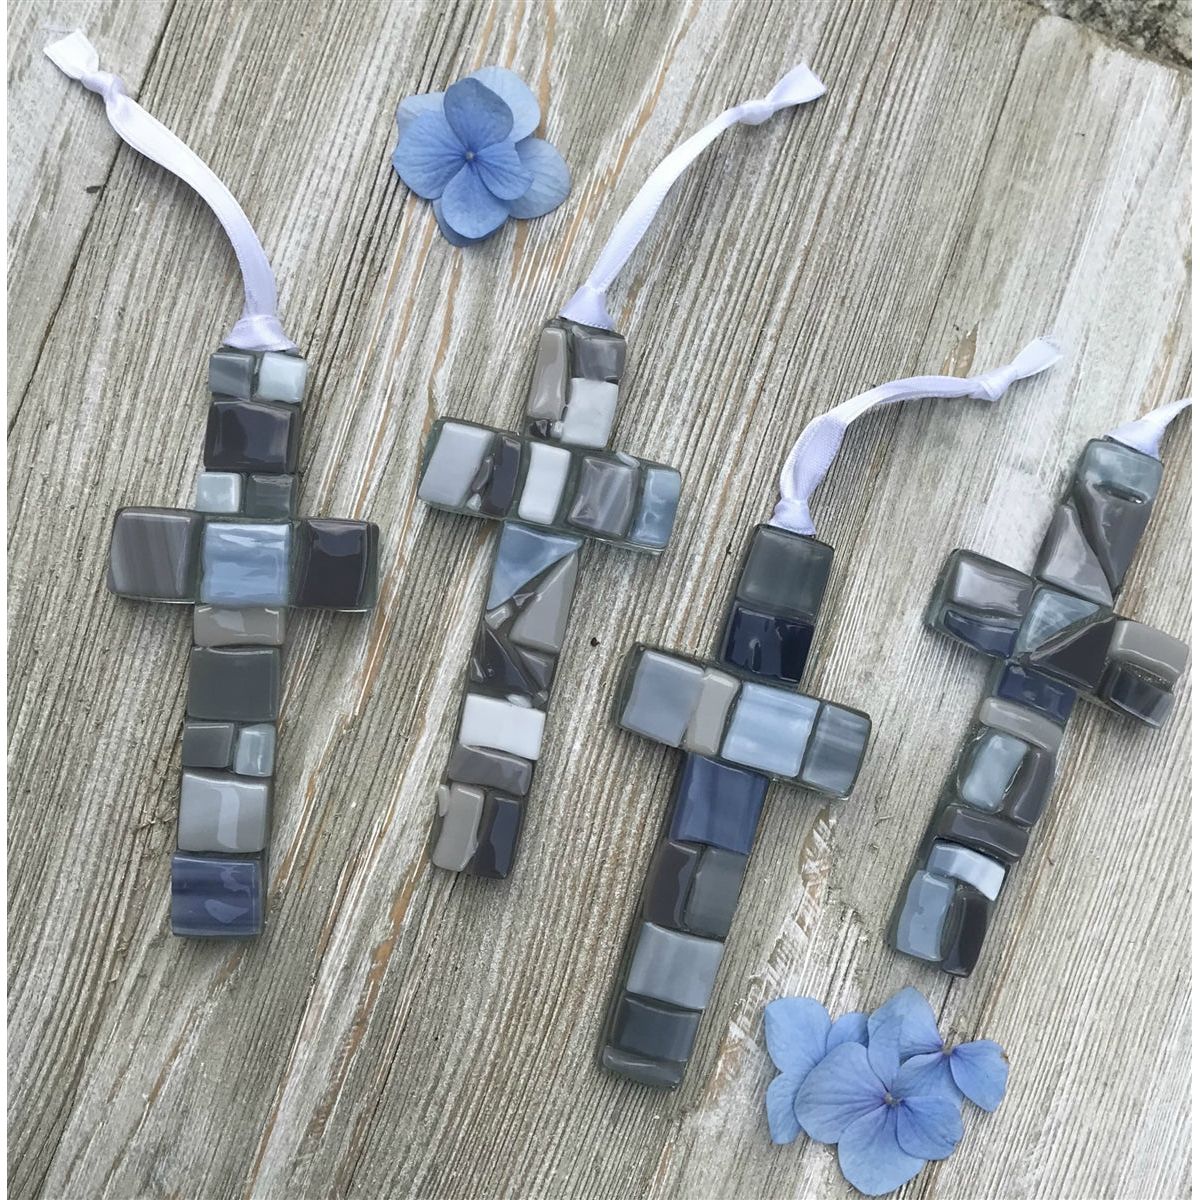 An assortment of gray mosaic crosses, each cross is unique